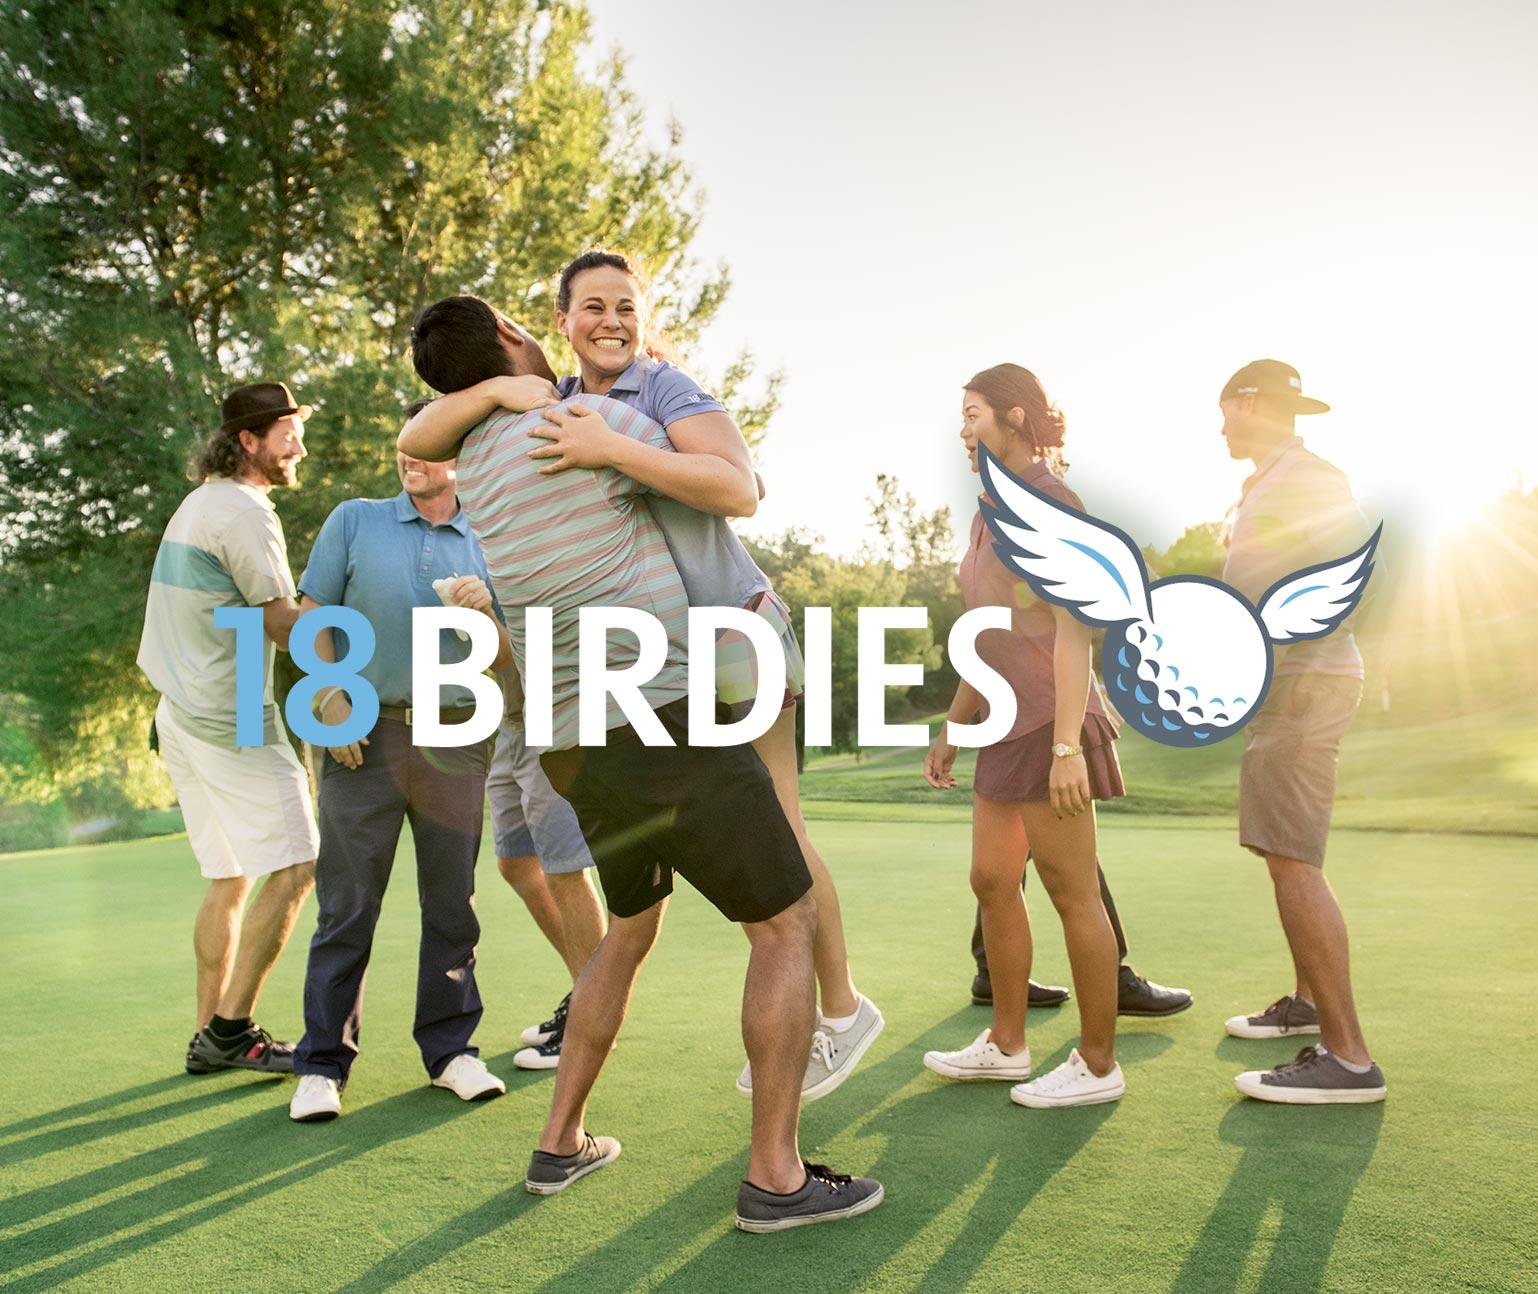 Six young adults golfing with the 18 Birdies logo over the image